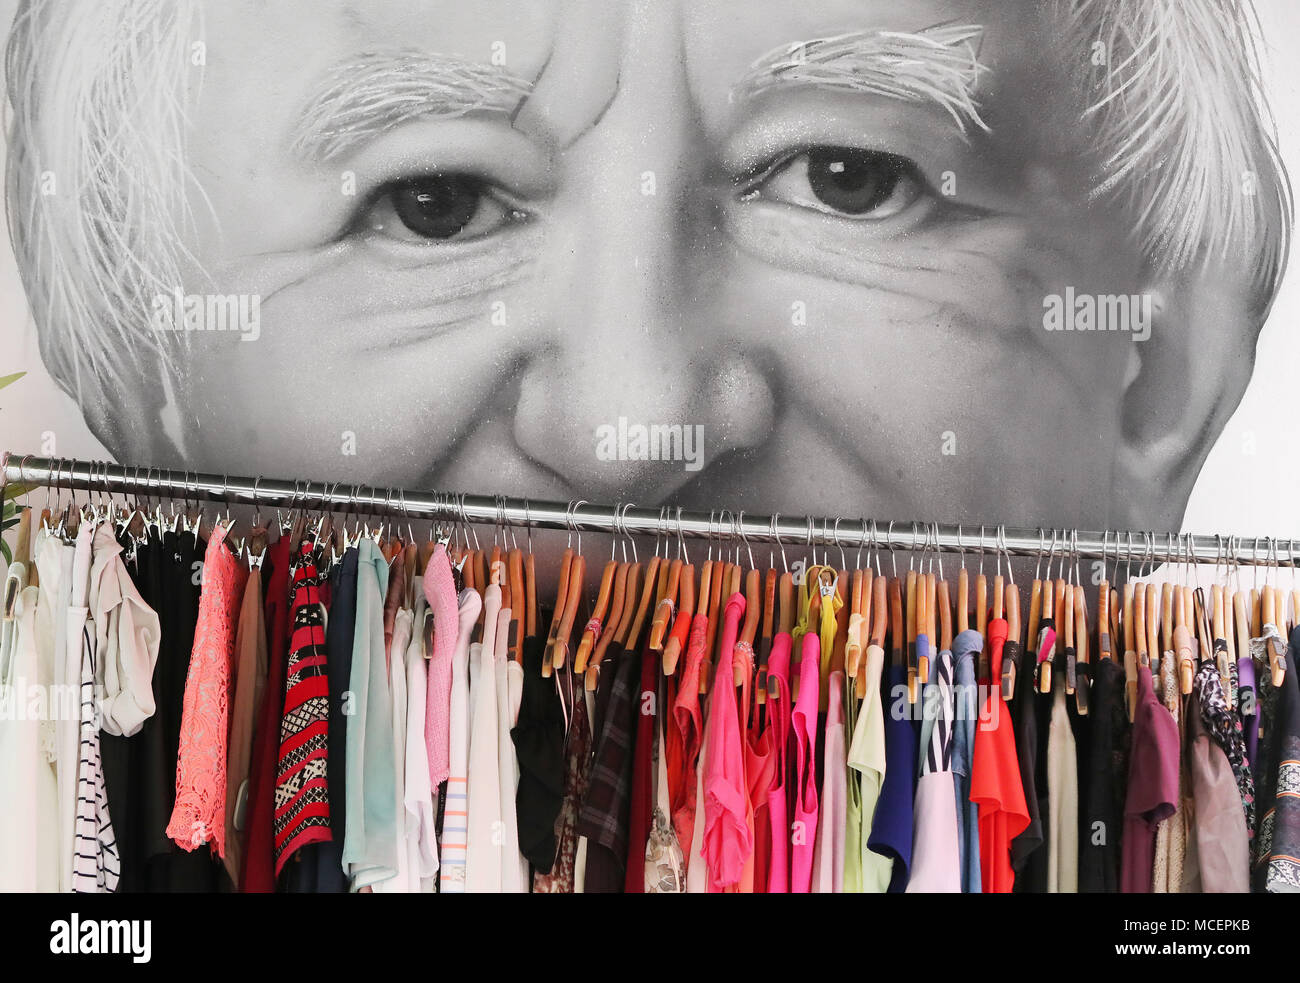 A general view of a clothing rack in front of a Mural of Irish President Michael D Higgins by Subset collective in the Temple Bar area of Dublin The mural is part of the #Greyareaproject, a protest against a recent Dublin City council clamp down on Street art. Stock Photo